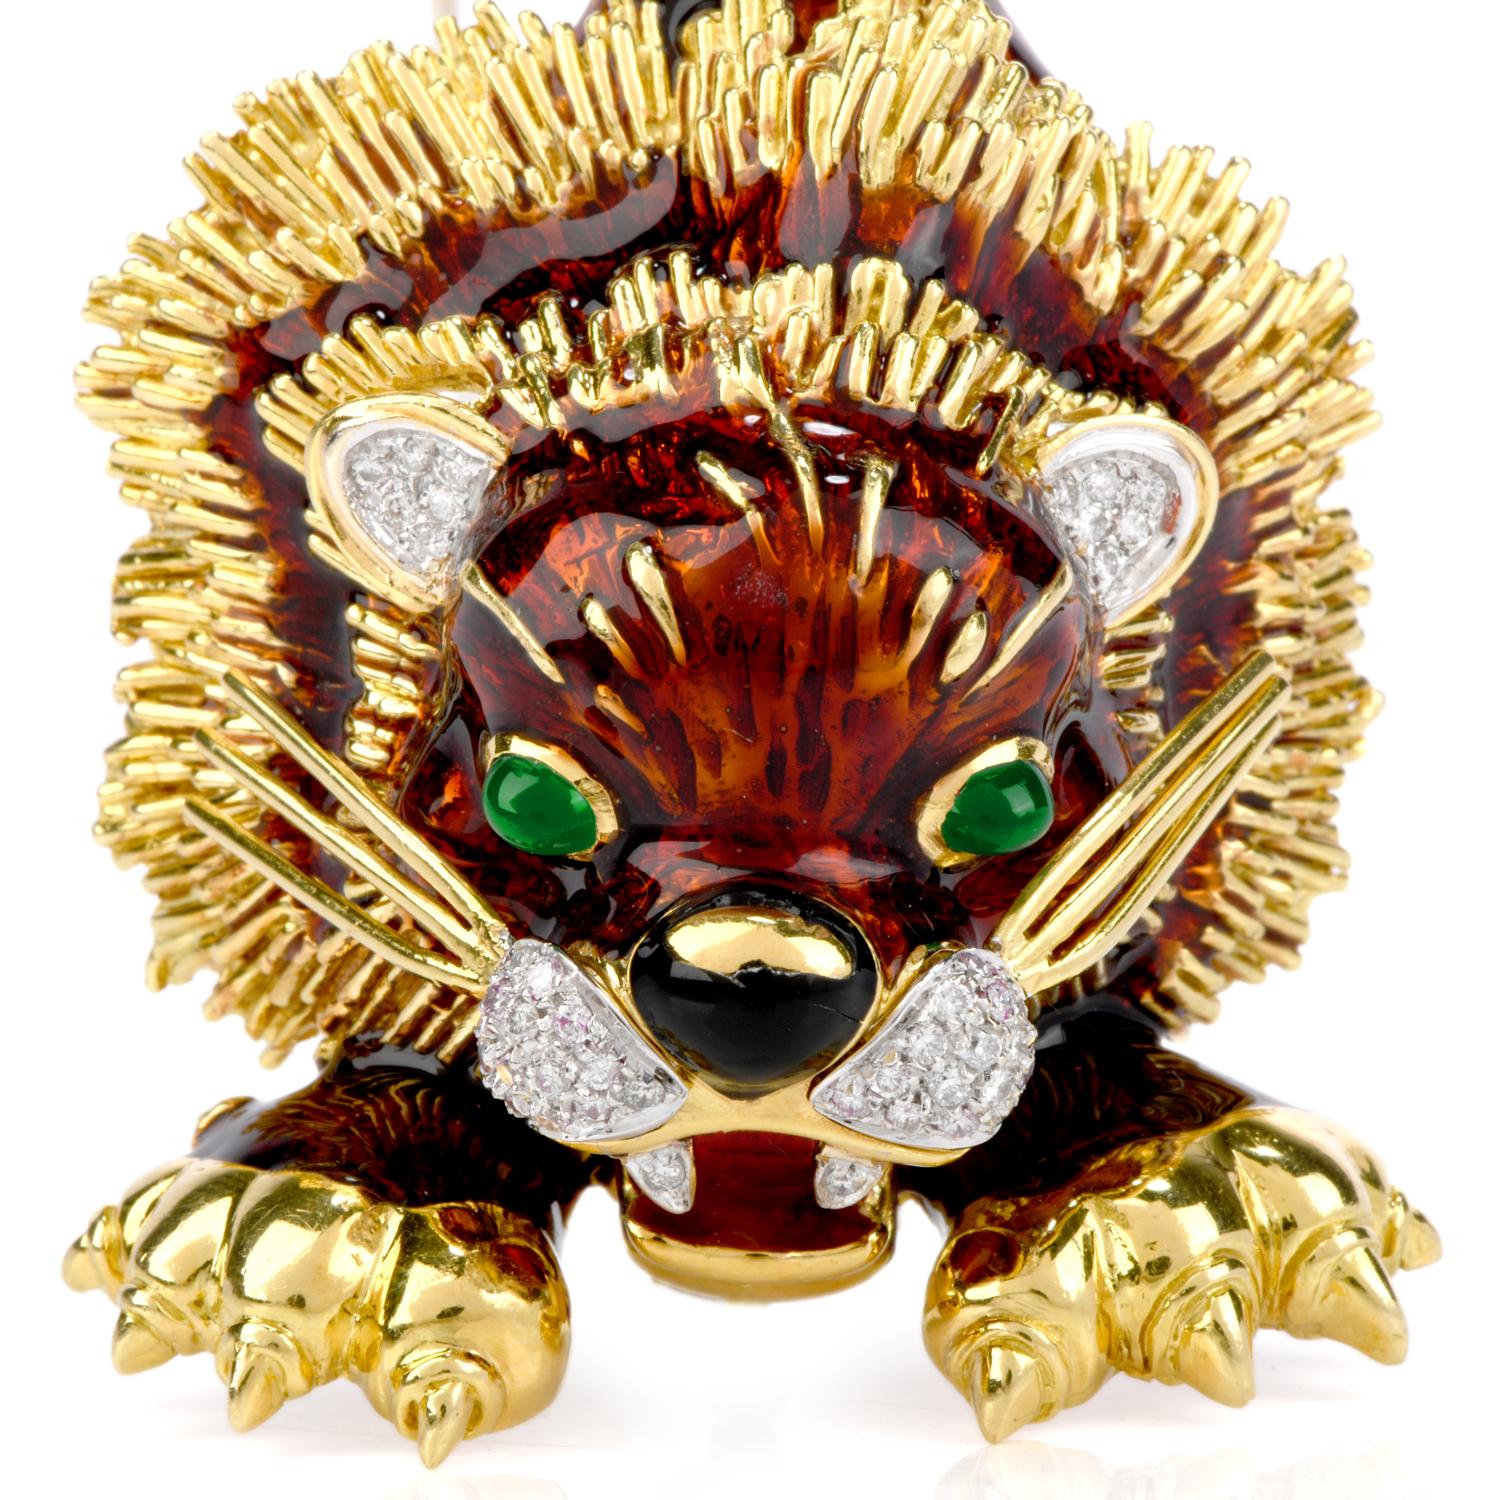 Take on your day head-first, with this exciting Frascarolo Vintage Diamond Emerald 18K Gold Lion Brooch Pin! This pin

boasts 54 genuine round cut diamonds, with 0.40 carats, H-I color and VS clarity, pave set on the ears, nose and teeth of

the